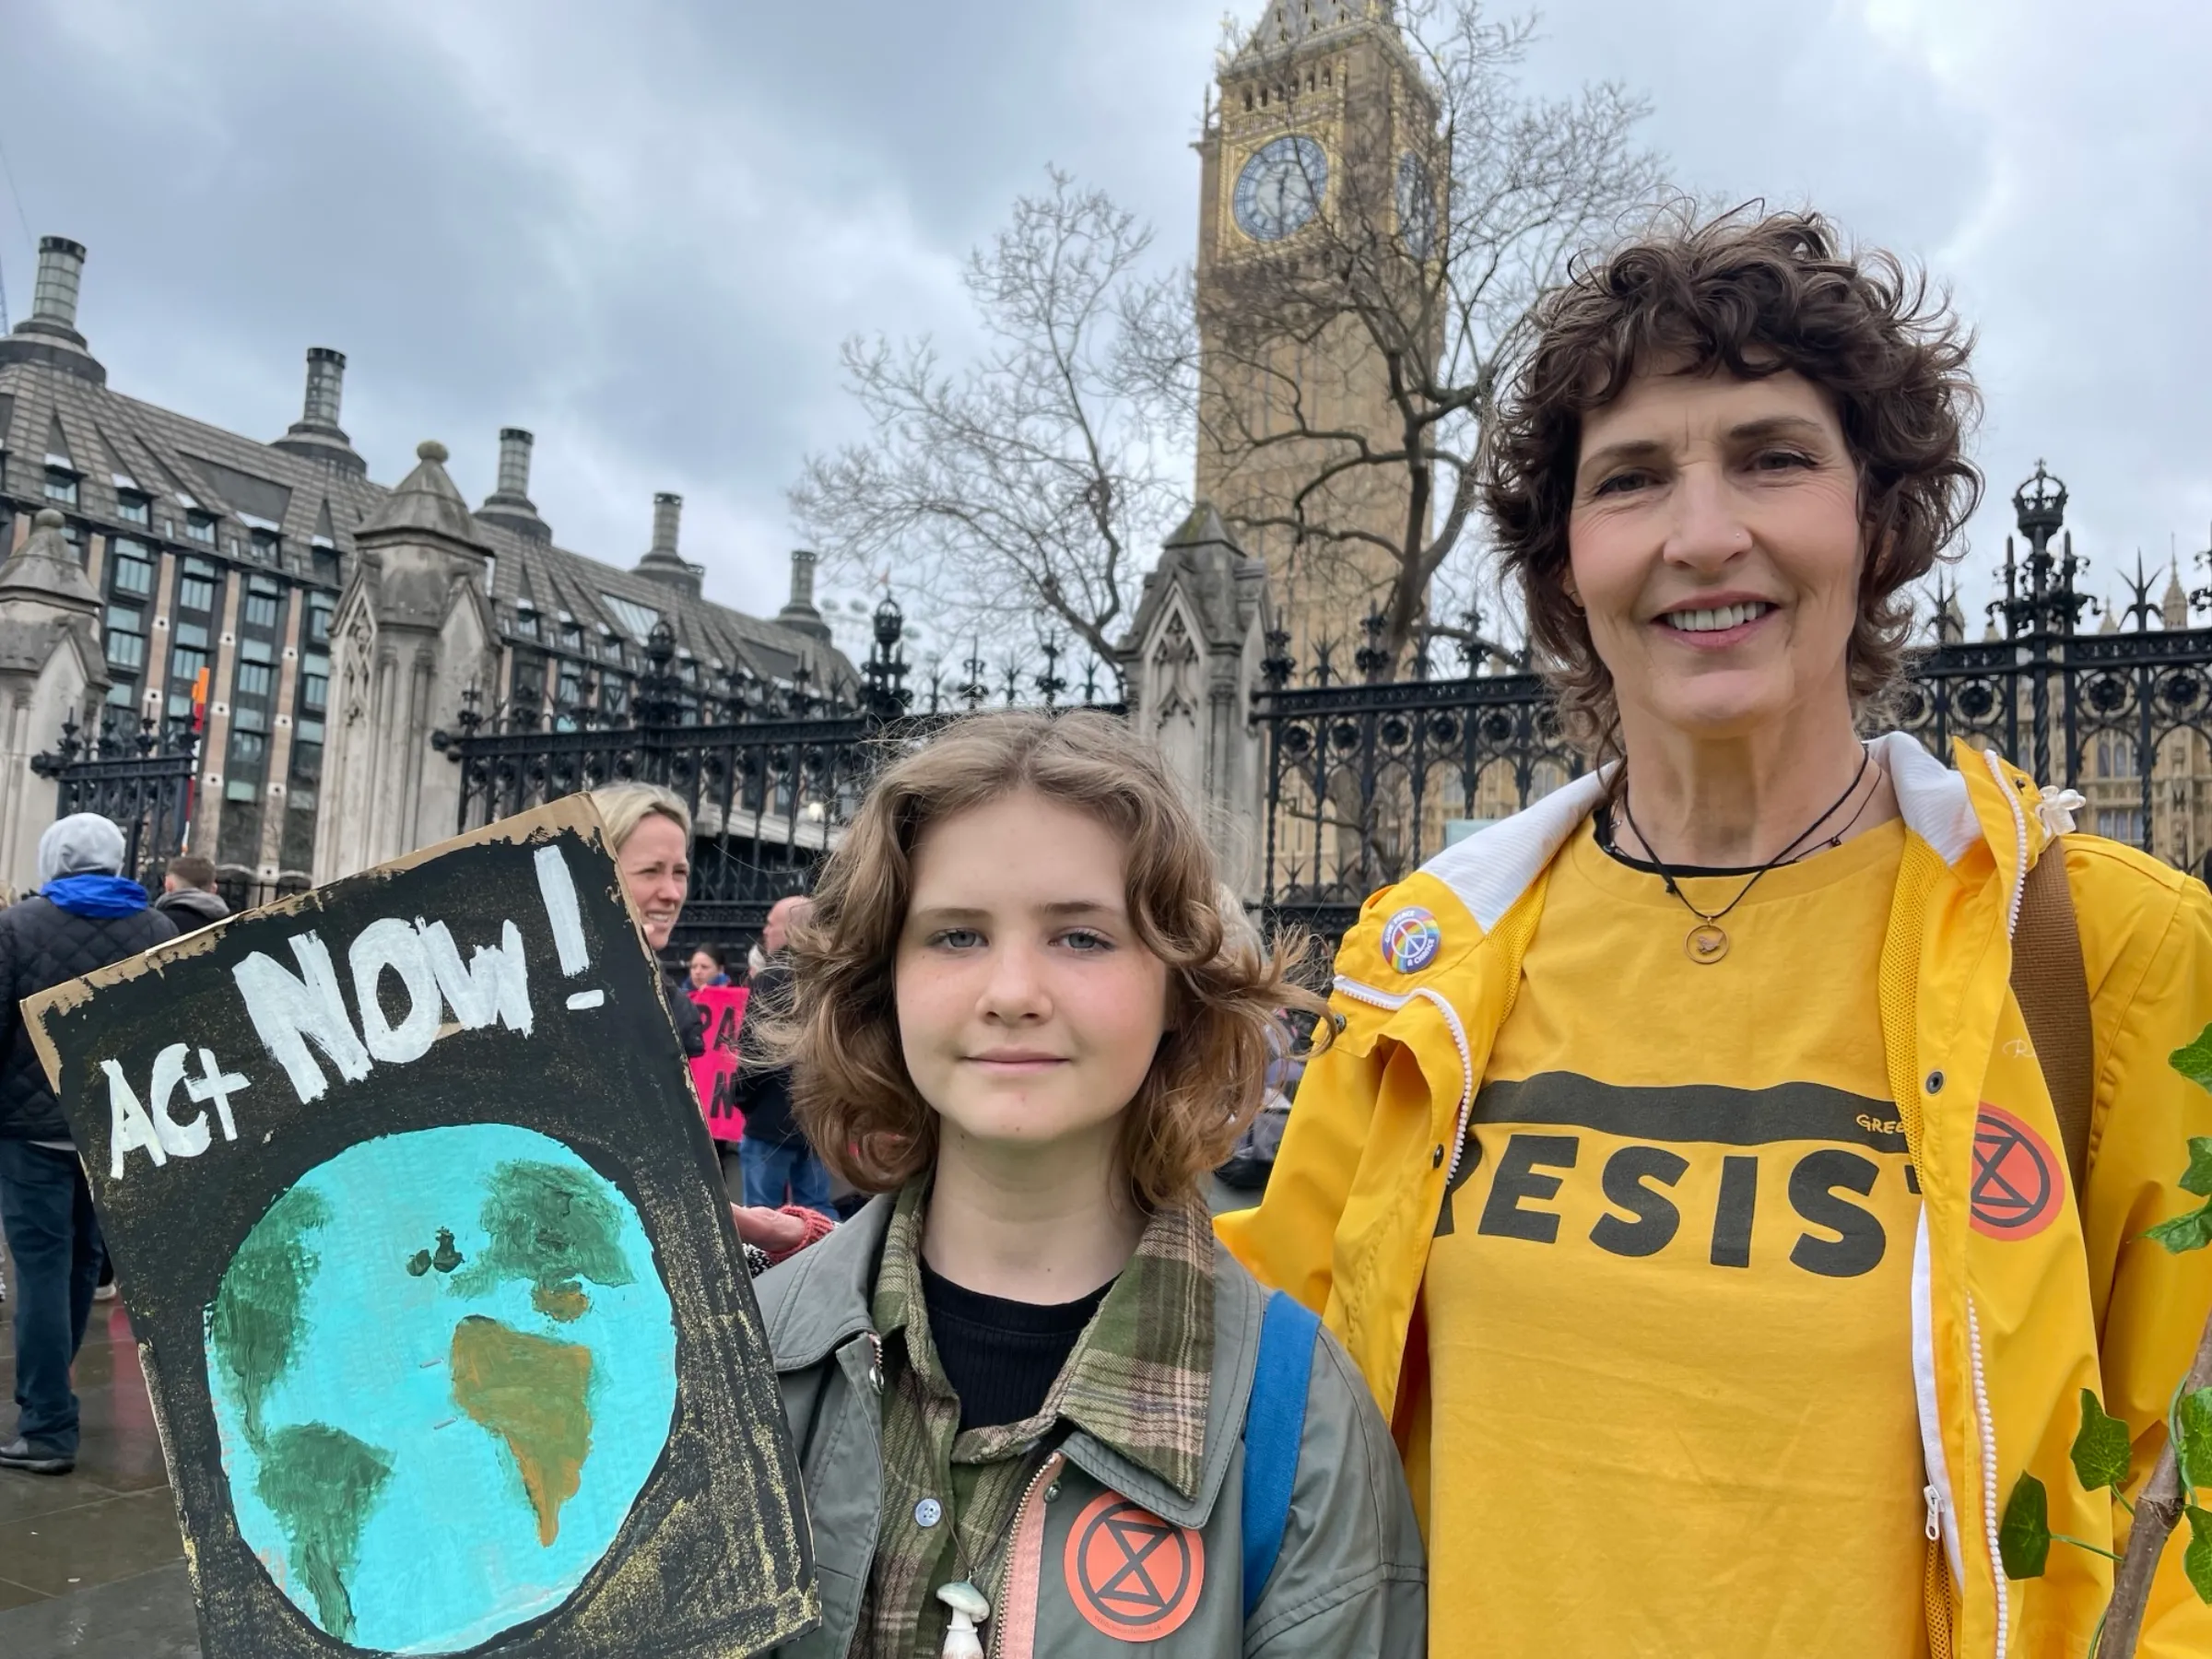 Pearl Konopka and Vanessa Lockett join “The Big One”, a protest organised by Extinction Rebellion outside Parliament in London on April 21, 2023. Thomson Reuters Foundation/Laurie Goering